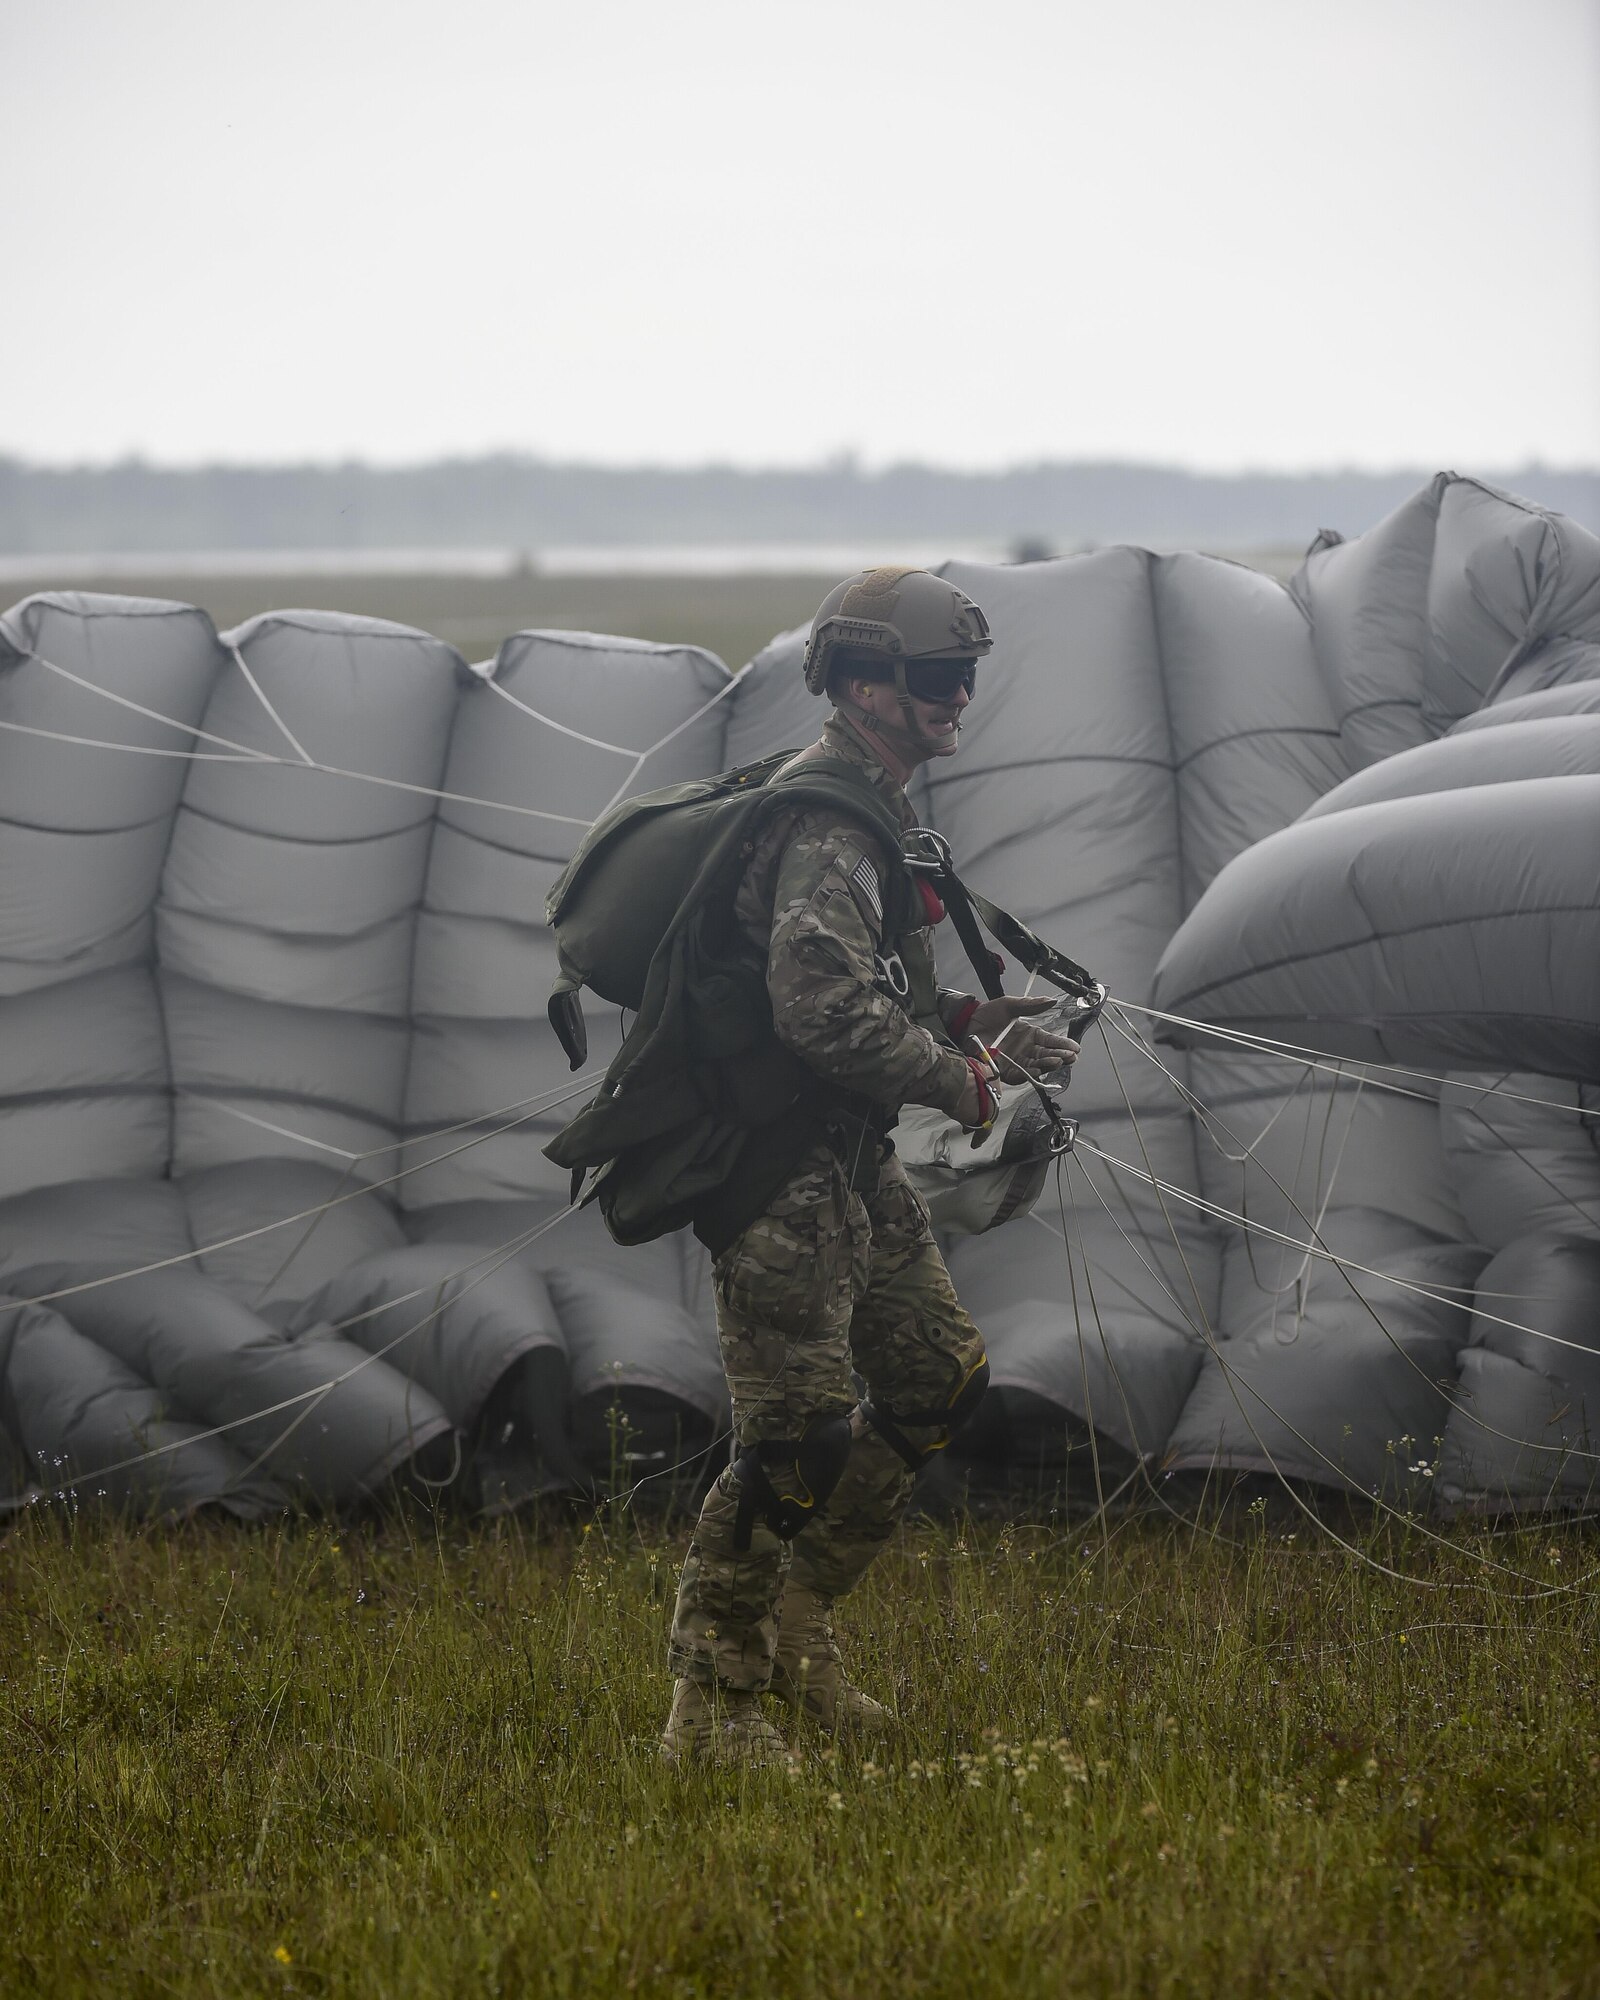 Chief Master Sgt. Bruce Dixon, the command chief master sergeant of the 24th Special Operations Wing, gathers a parachute following the final jump of his career at Hurlburt Field, Fla., May 3, 2016. Dixon, who is retiring after a 30-year career as a combat controller, is one of a handful of military members to complete three freefall jumps into combat since the Vietnam War. (U.S. Air Force photo by Airman 1st Class Kai White)  